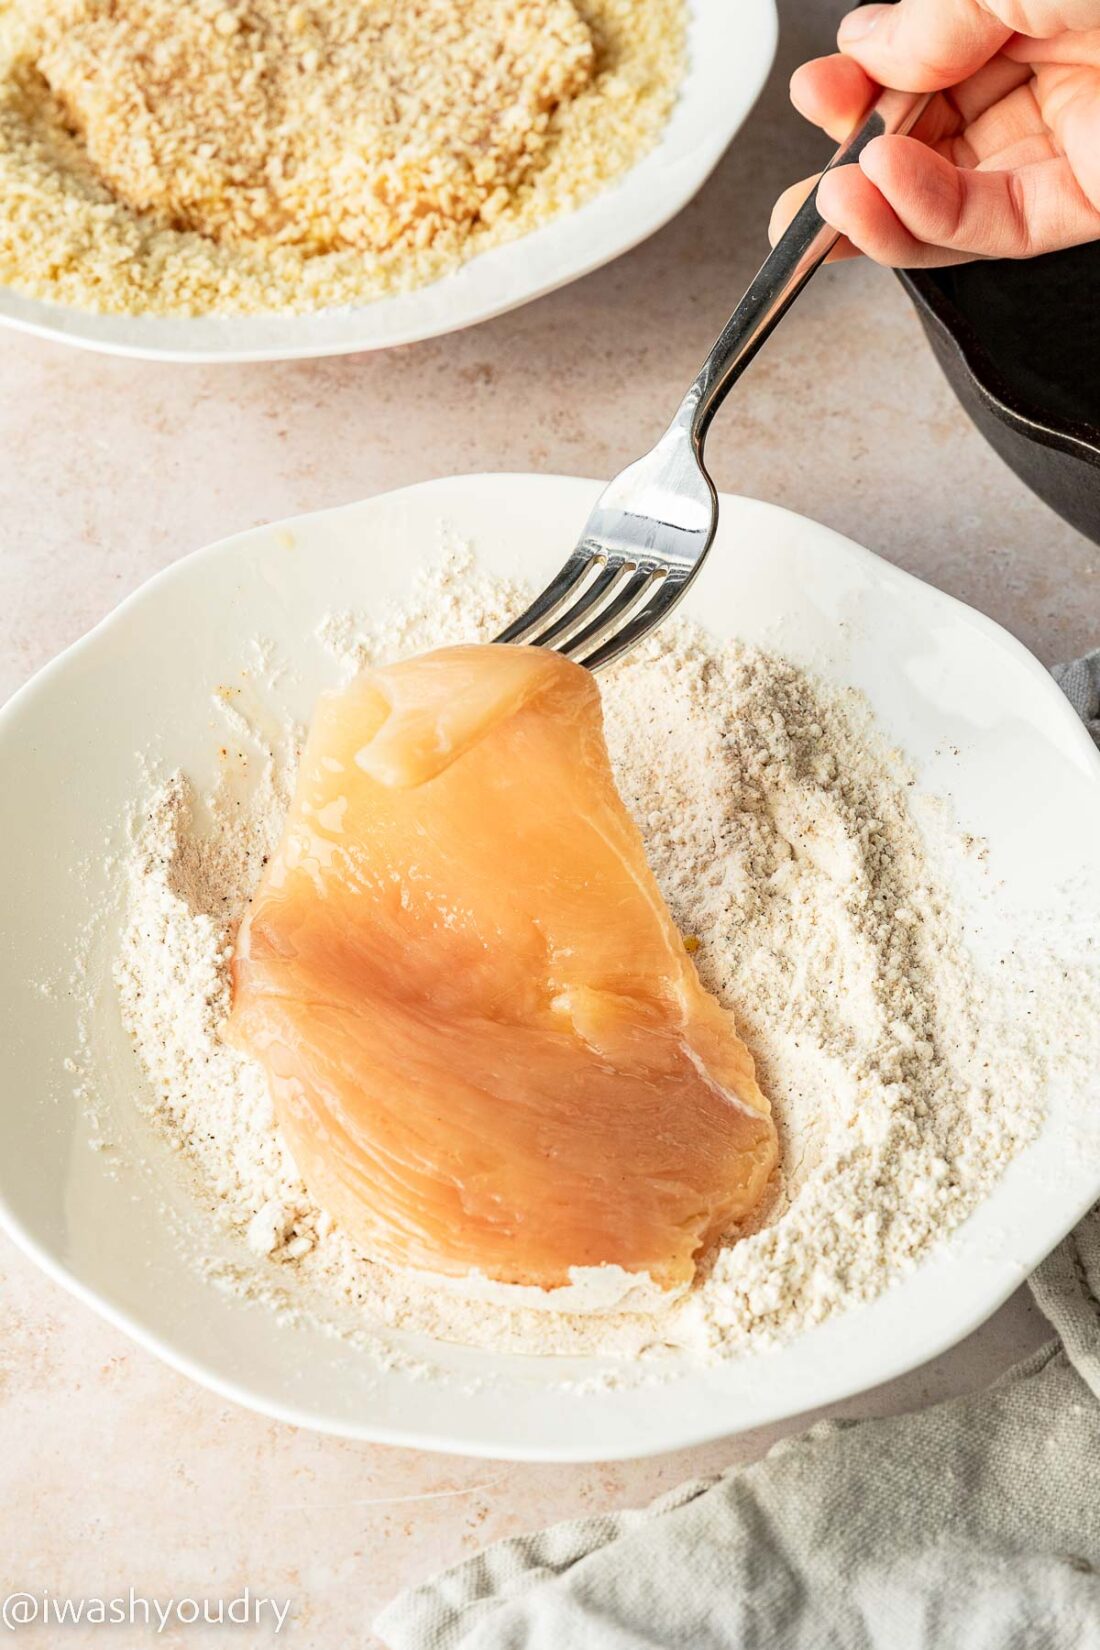 Raw chicken on fork dipping into white bowl of flour. 